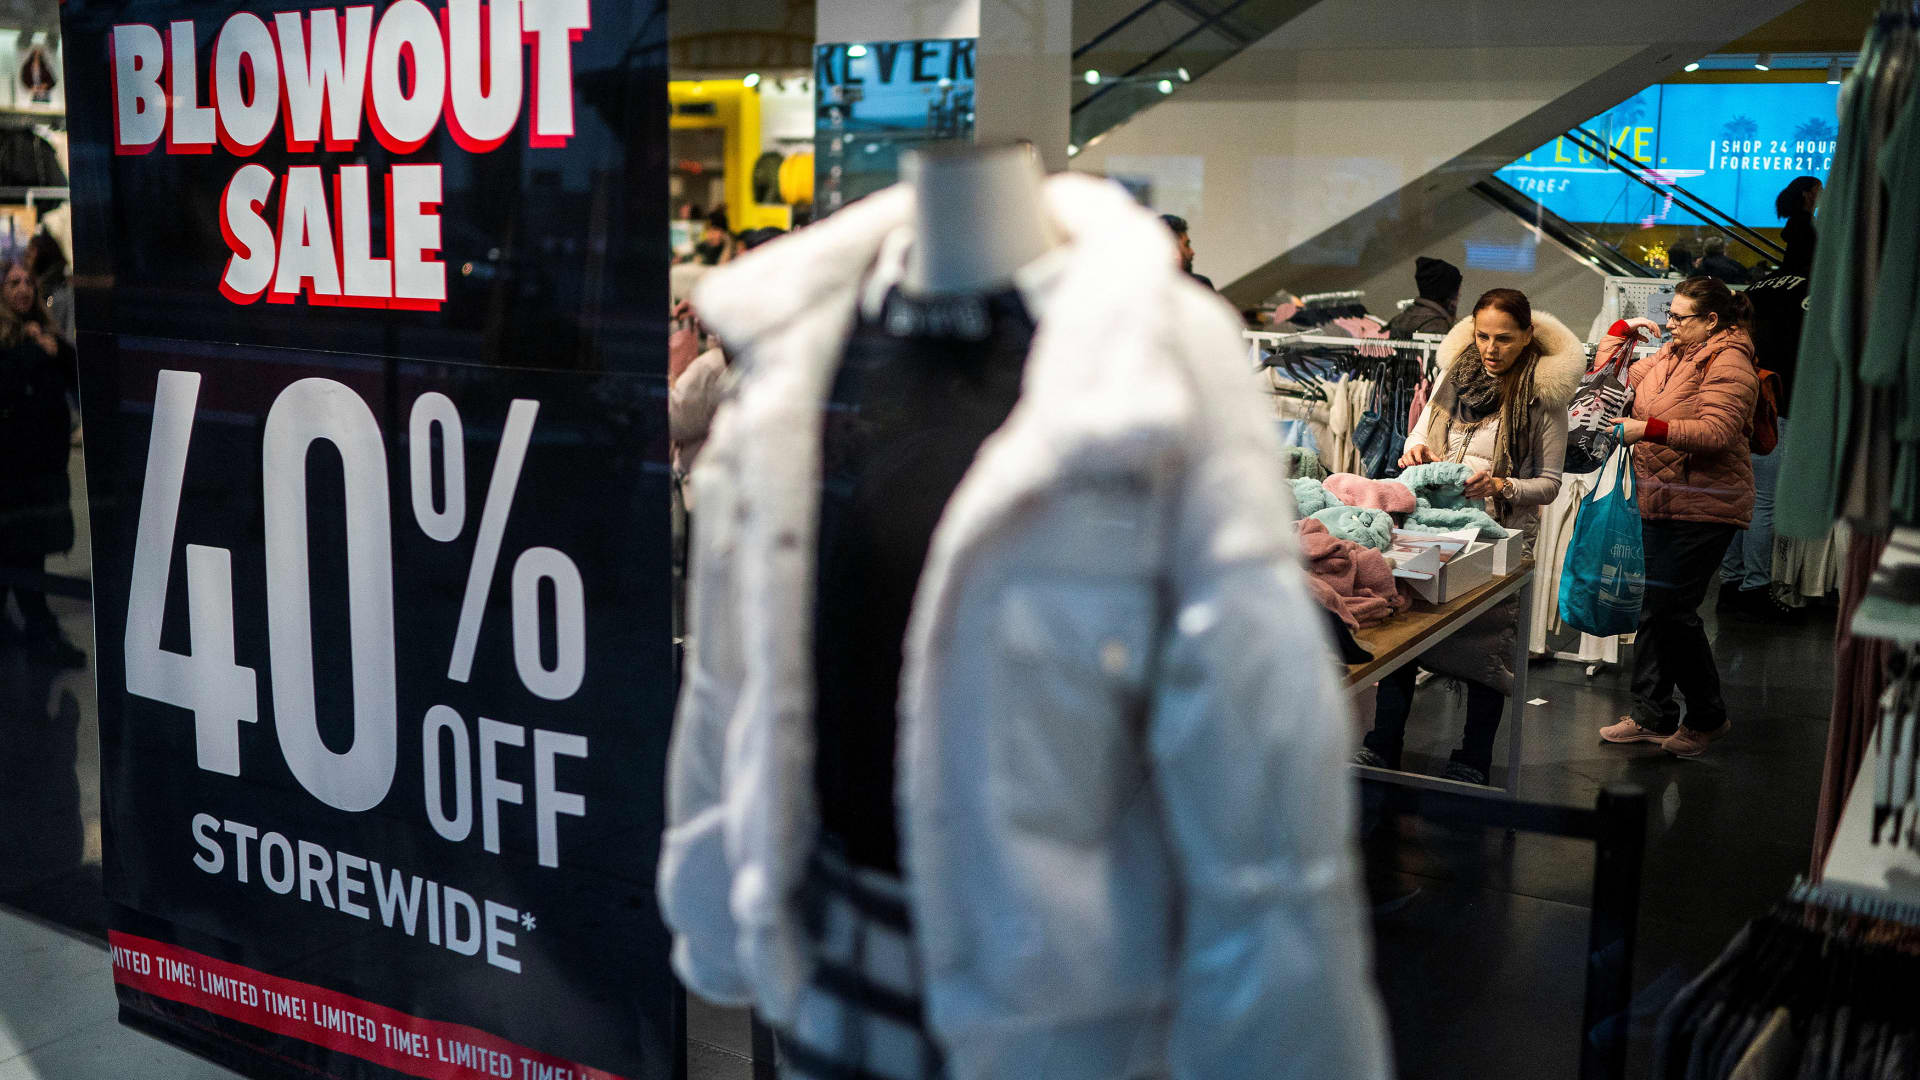 Consumer prices rose 0.3% in December, higher than expected, pushing the annual rate to 3.4%